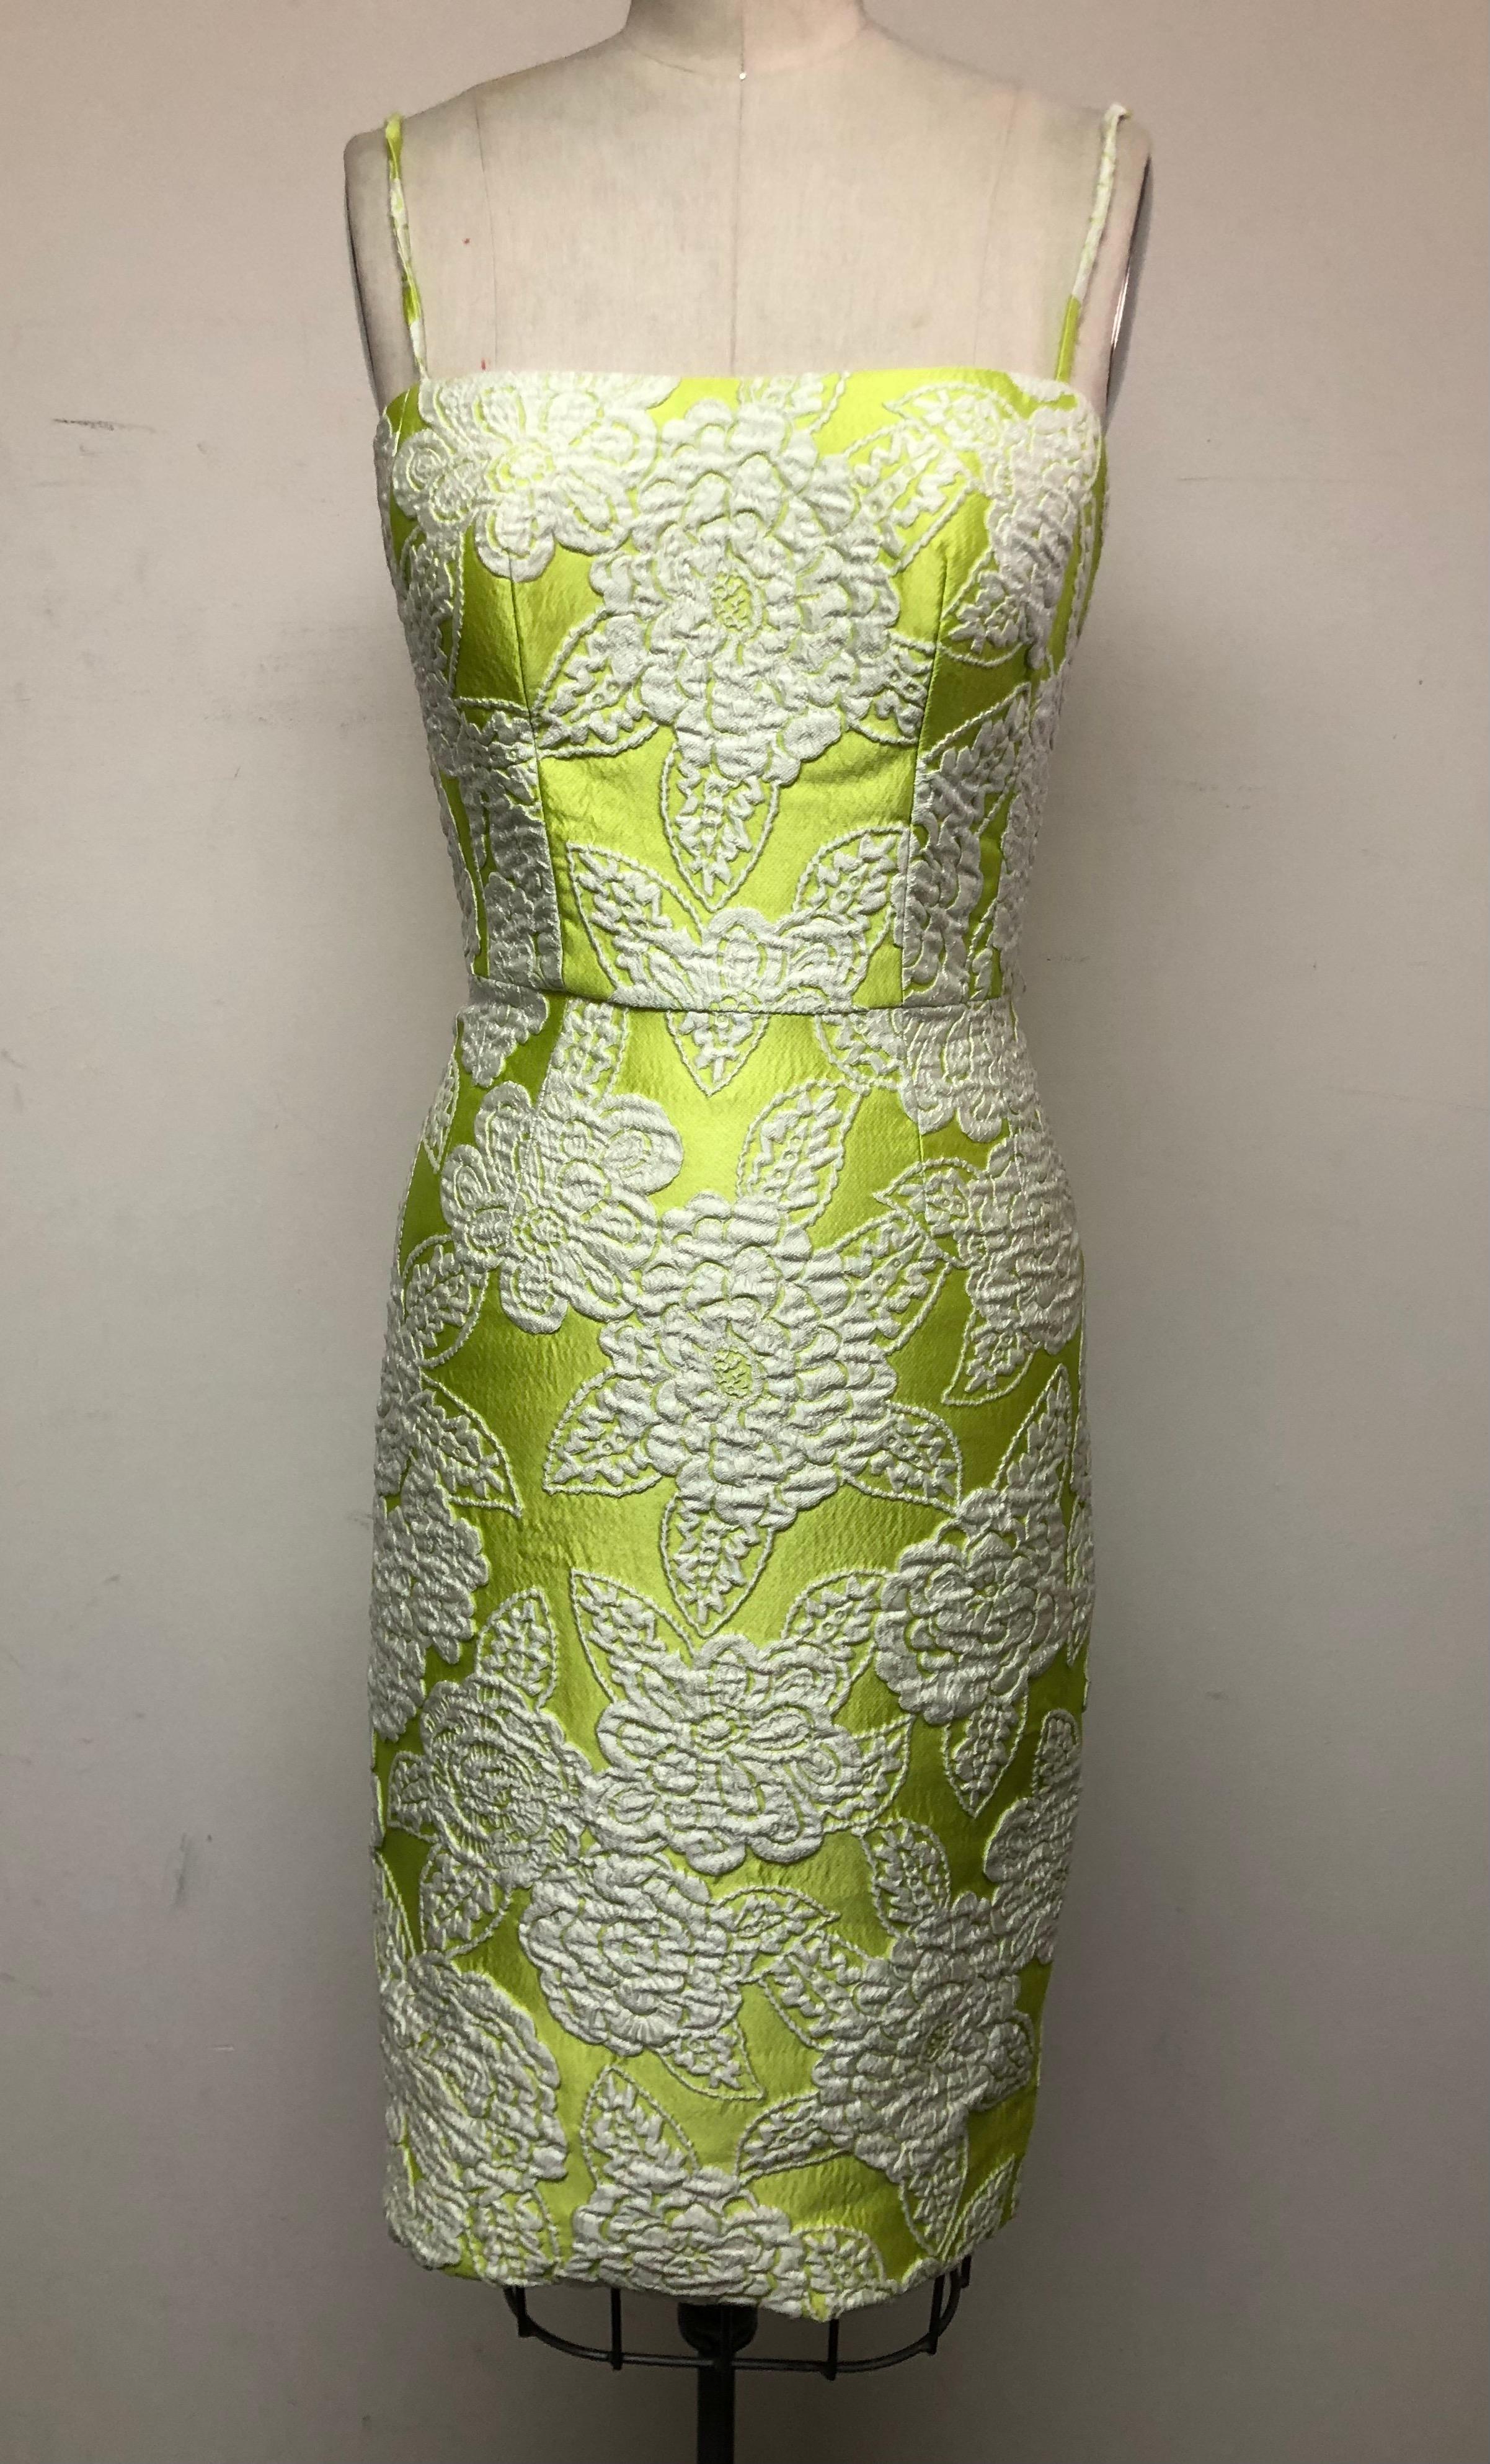 Charming Summer frock for winter or summer escapes. Lime green with white textured imported fabric gives this lovely dress a unique and lux feel. The color combination is fresh and exciting. Built in cups and bones for maximum bodice comfort and